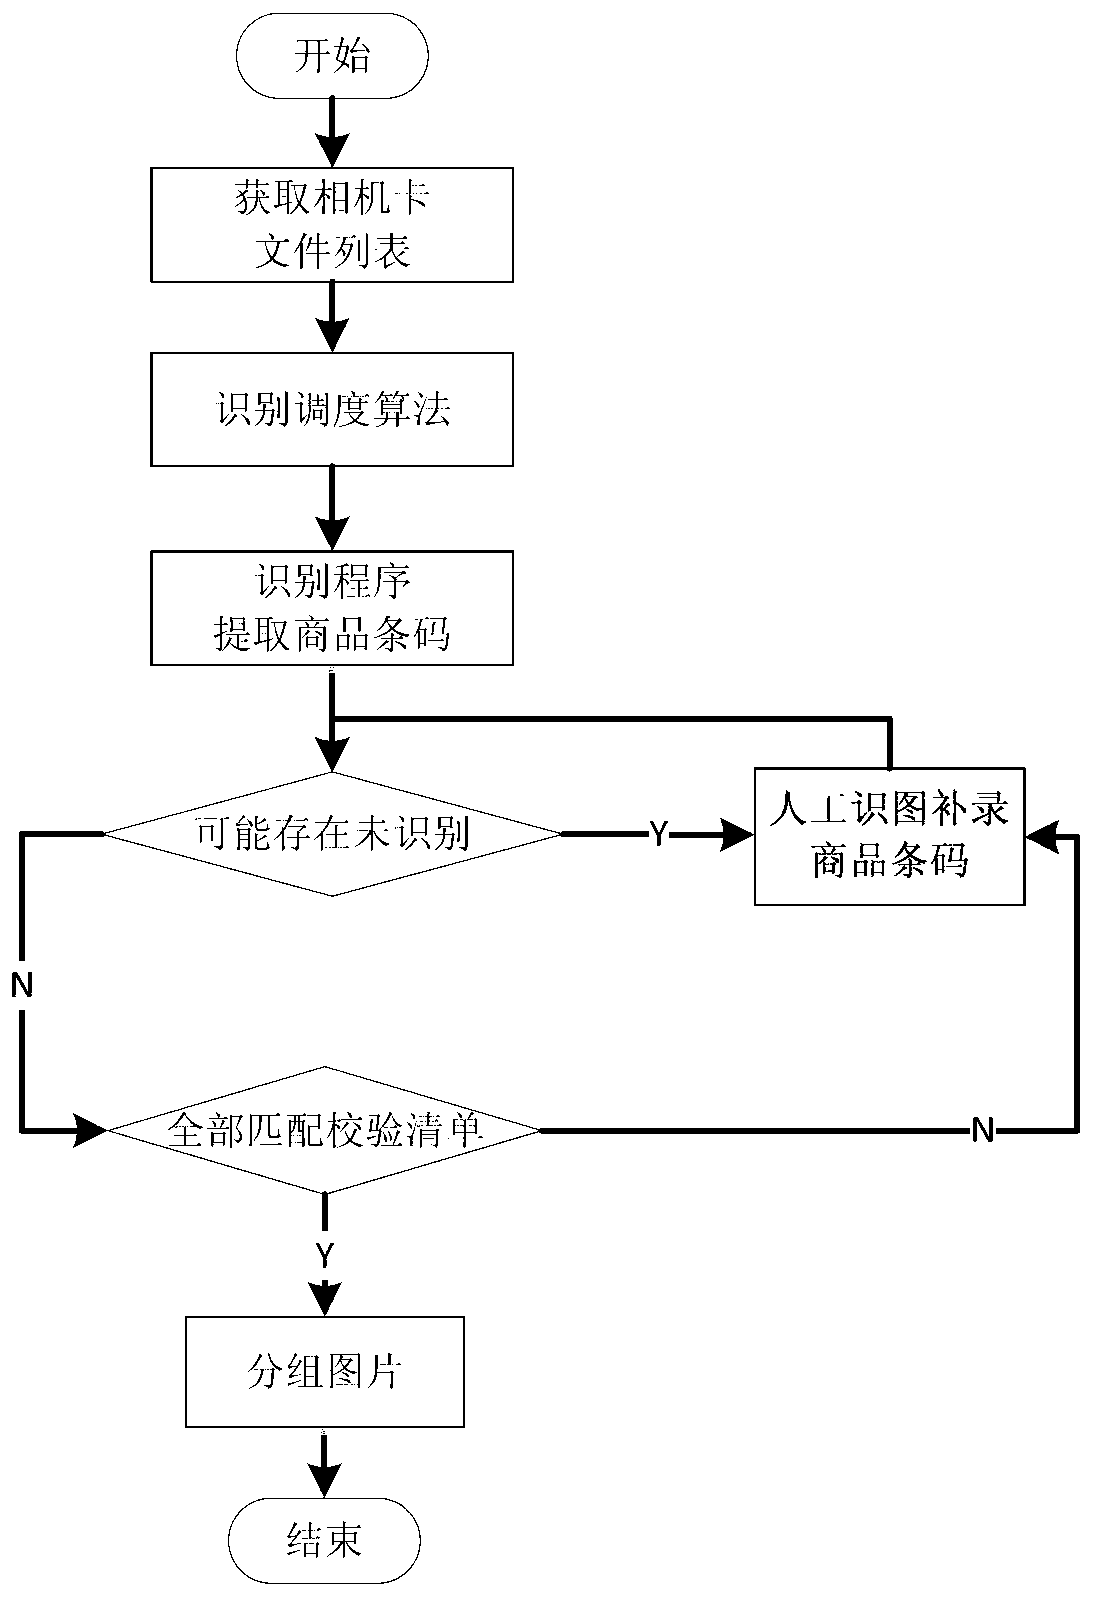 Method and device for grouping product pictures